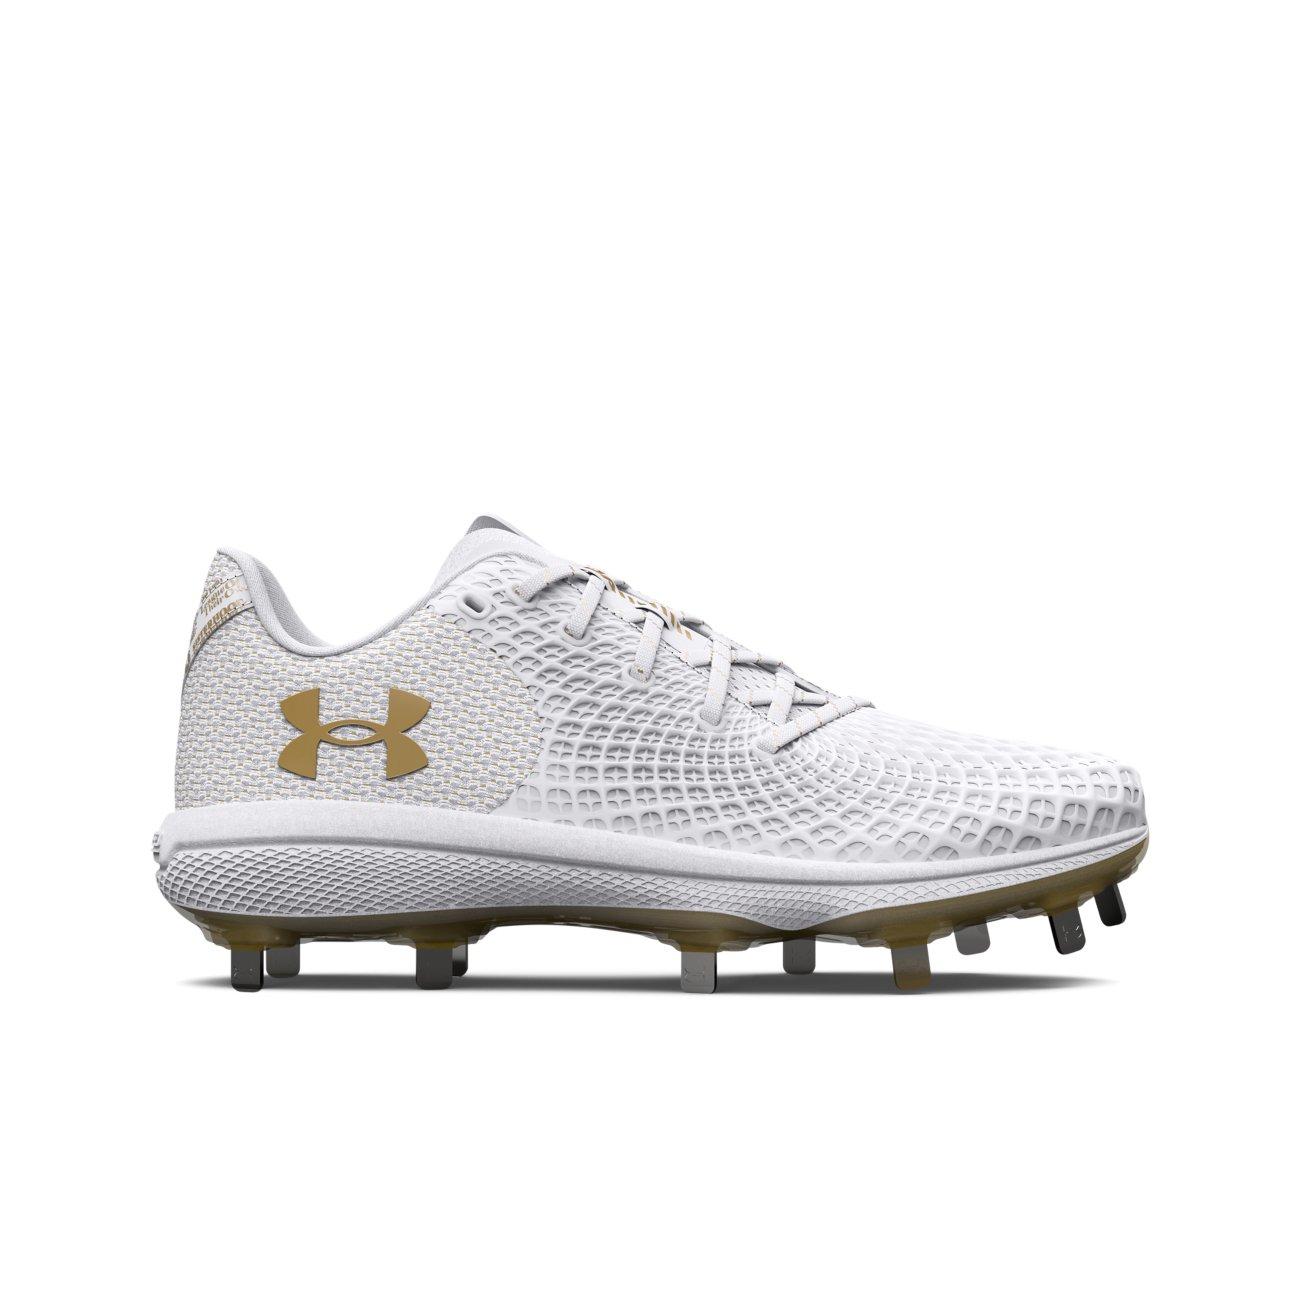 Under Armour Women's Glyde MT Softball Cleats - White, 7.5